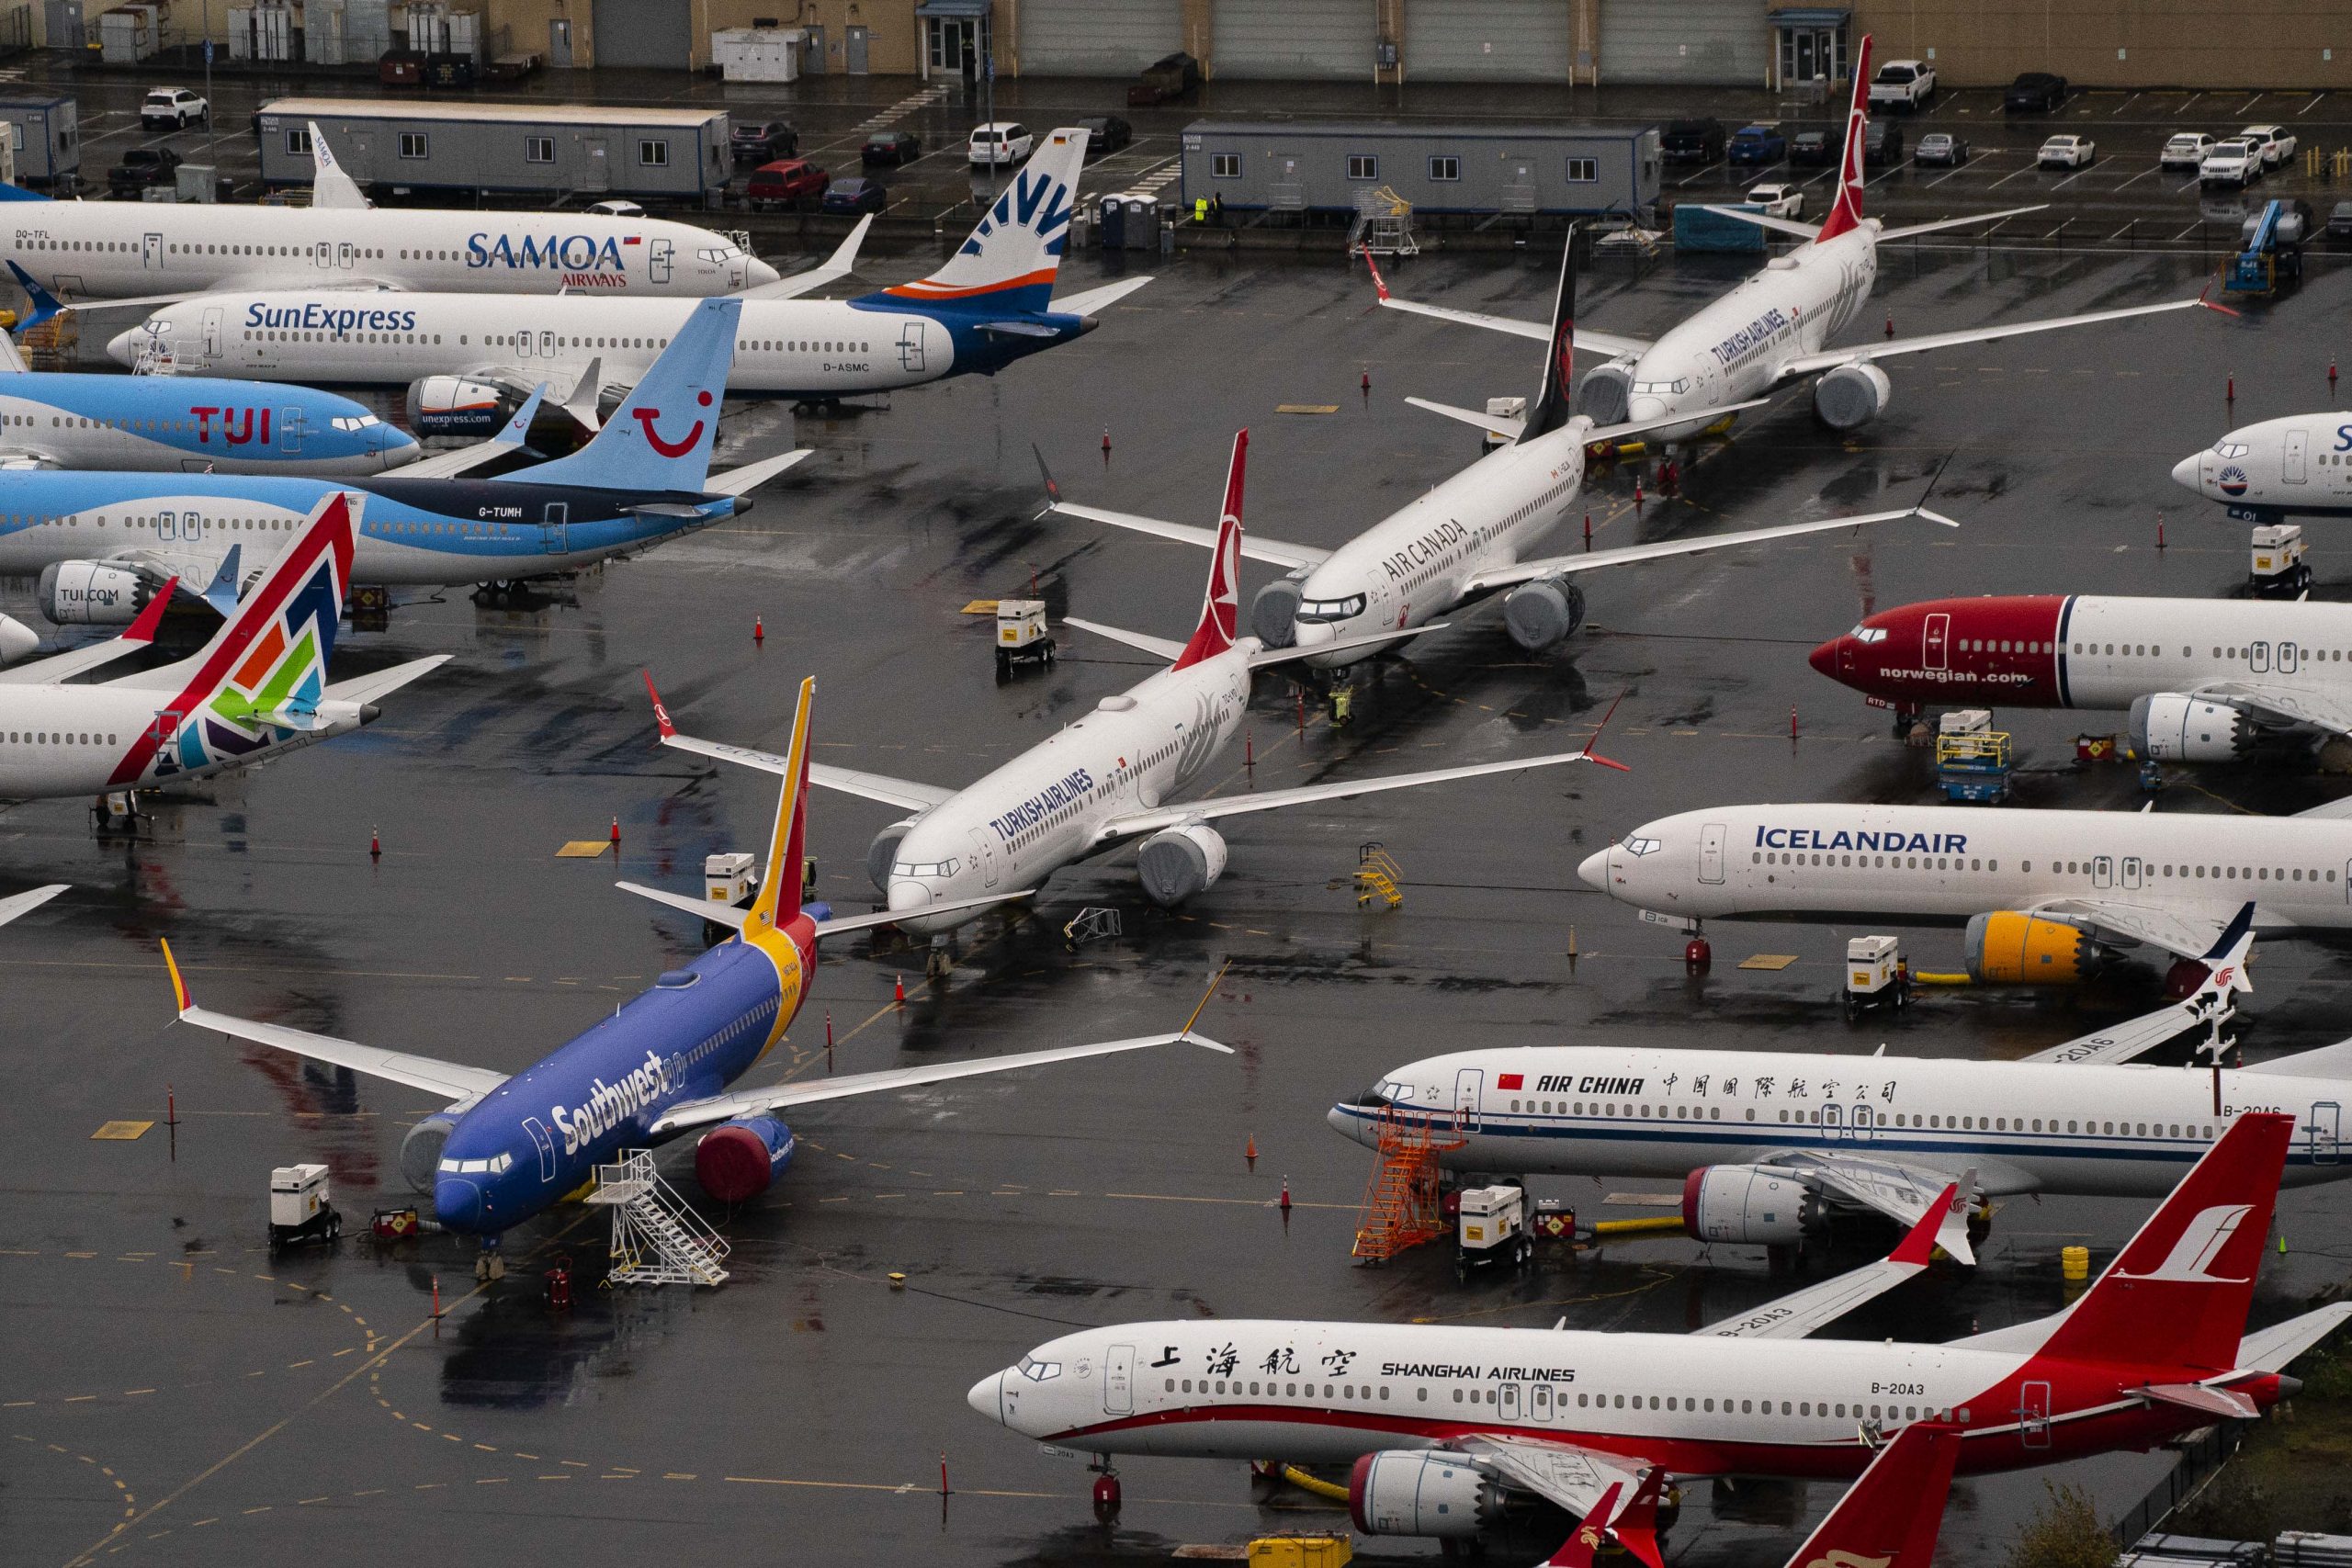 Boeing also announced a maximum of 737 cancellations in November